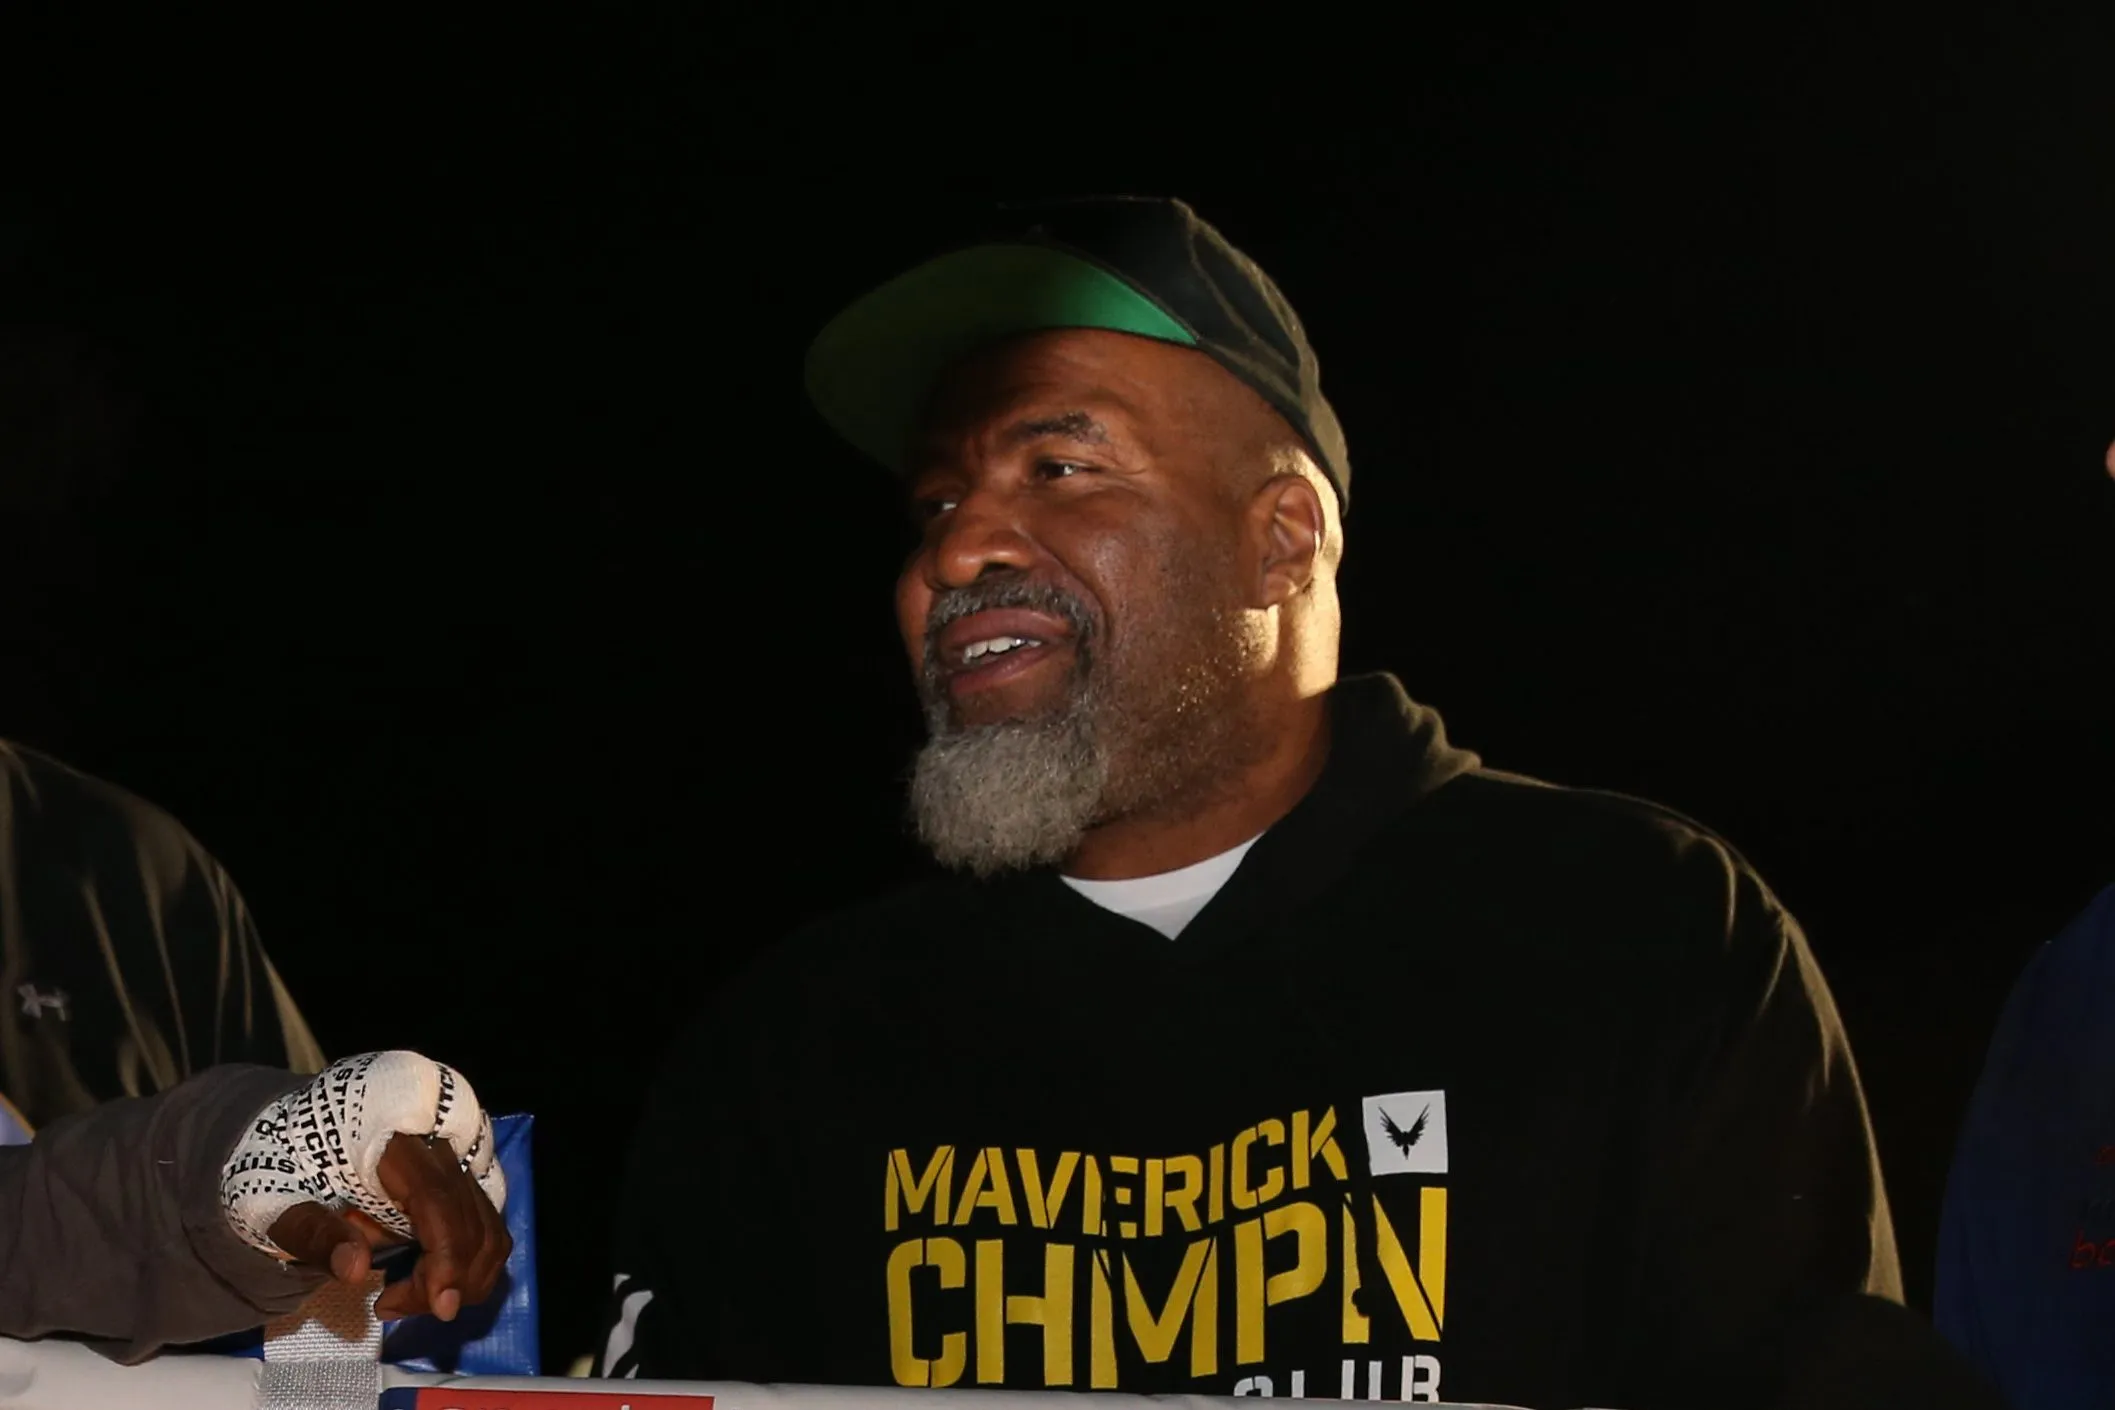 Shannon Briggs on Fury-Ngannou: 'It's an unbelievable fight'